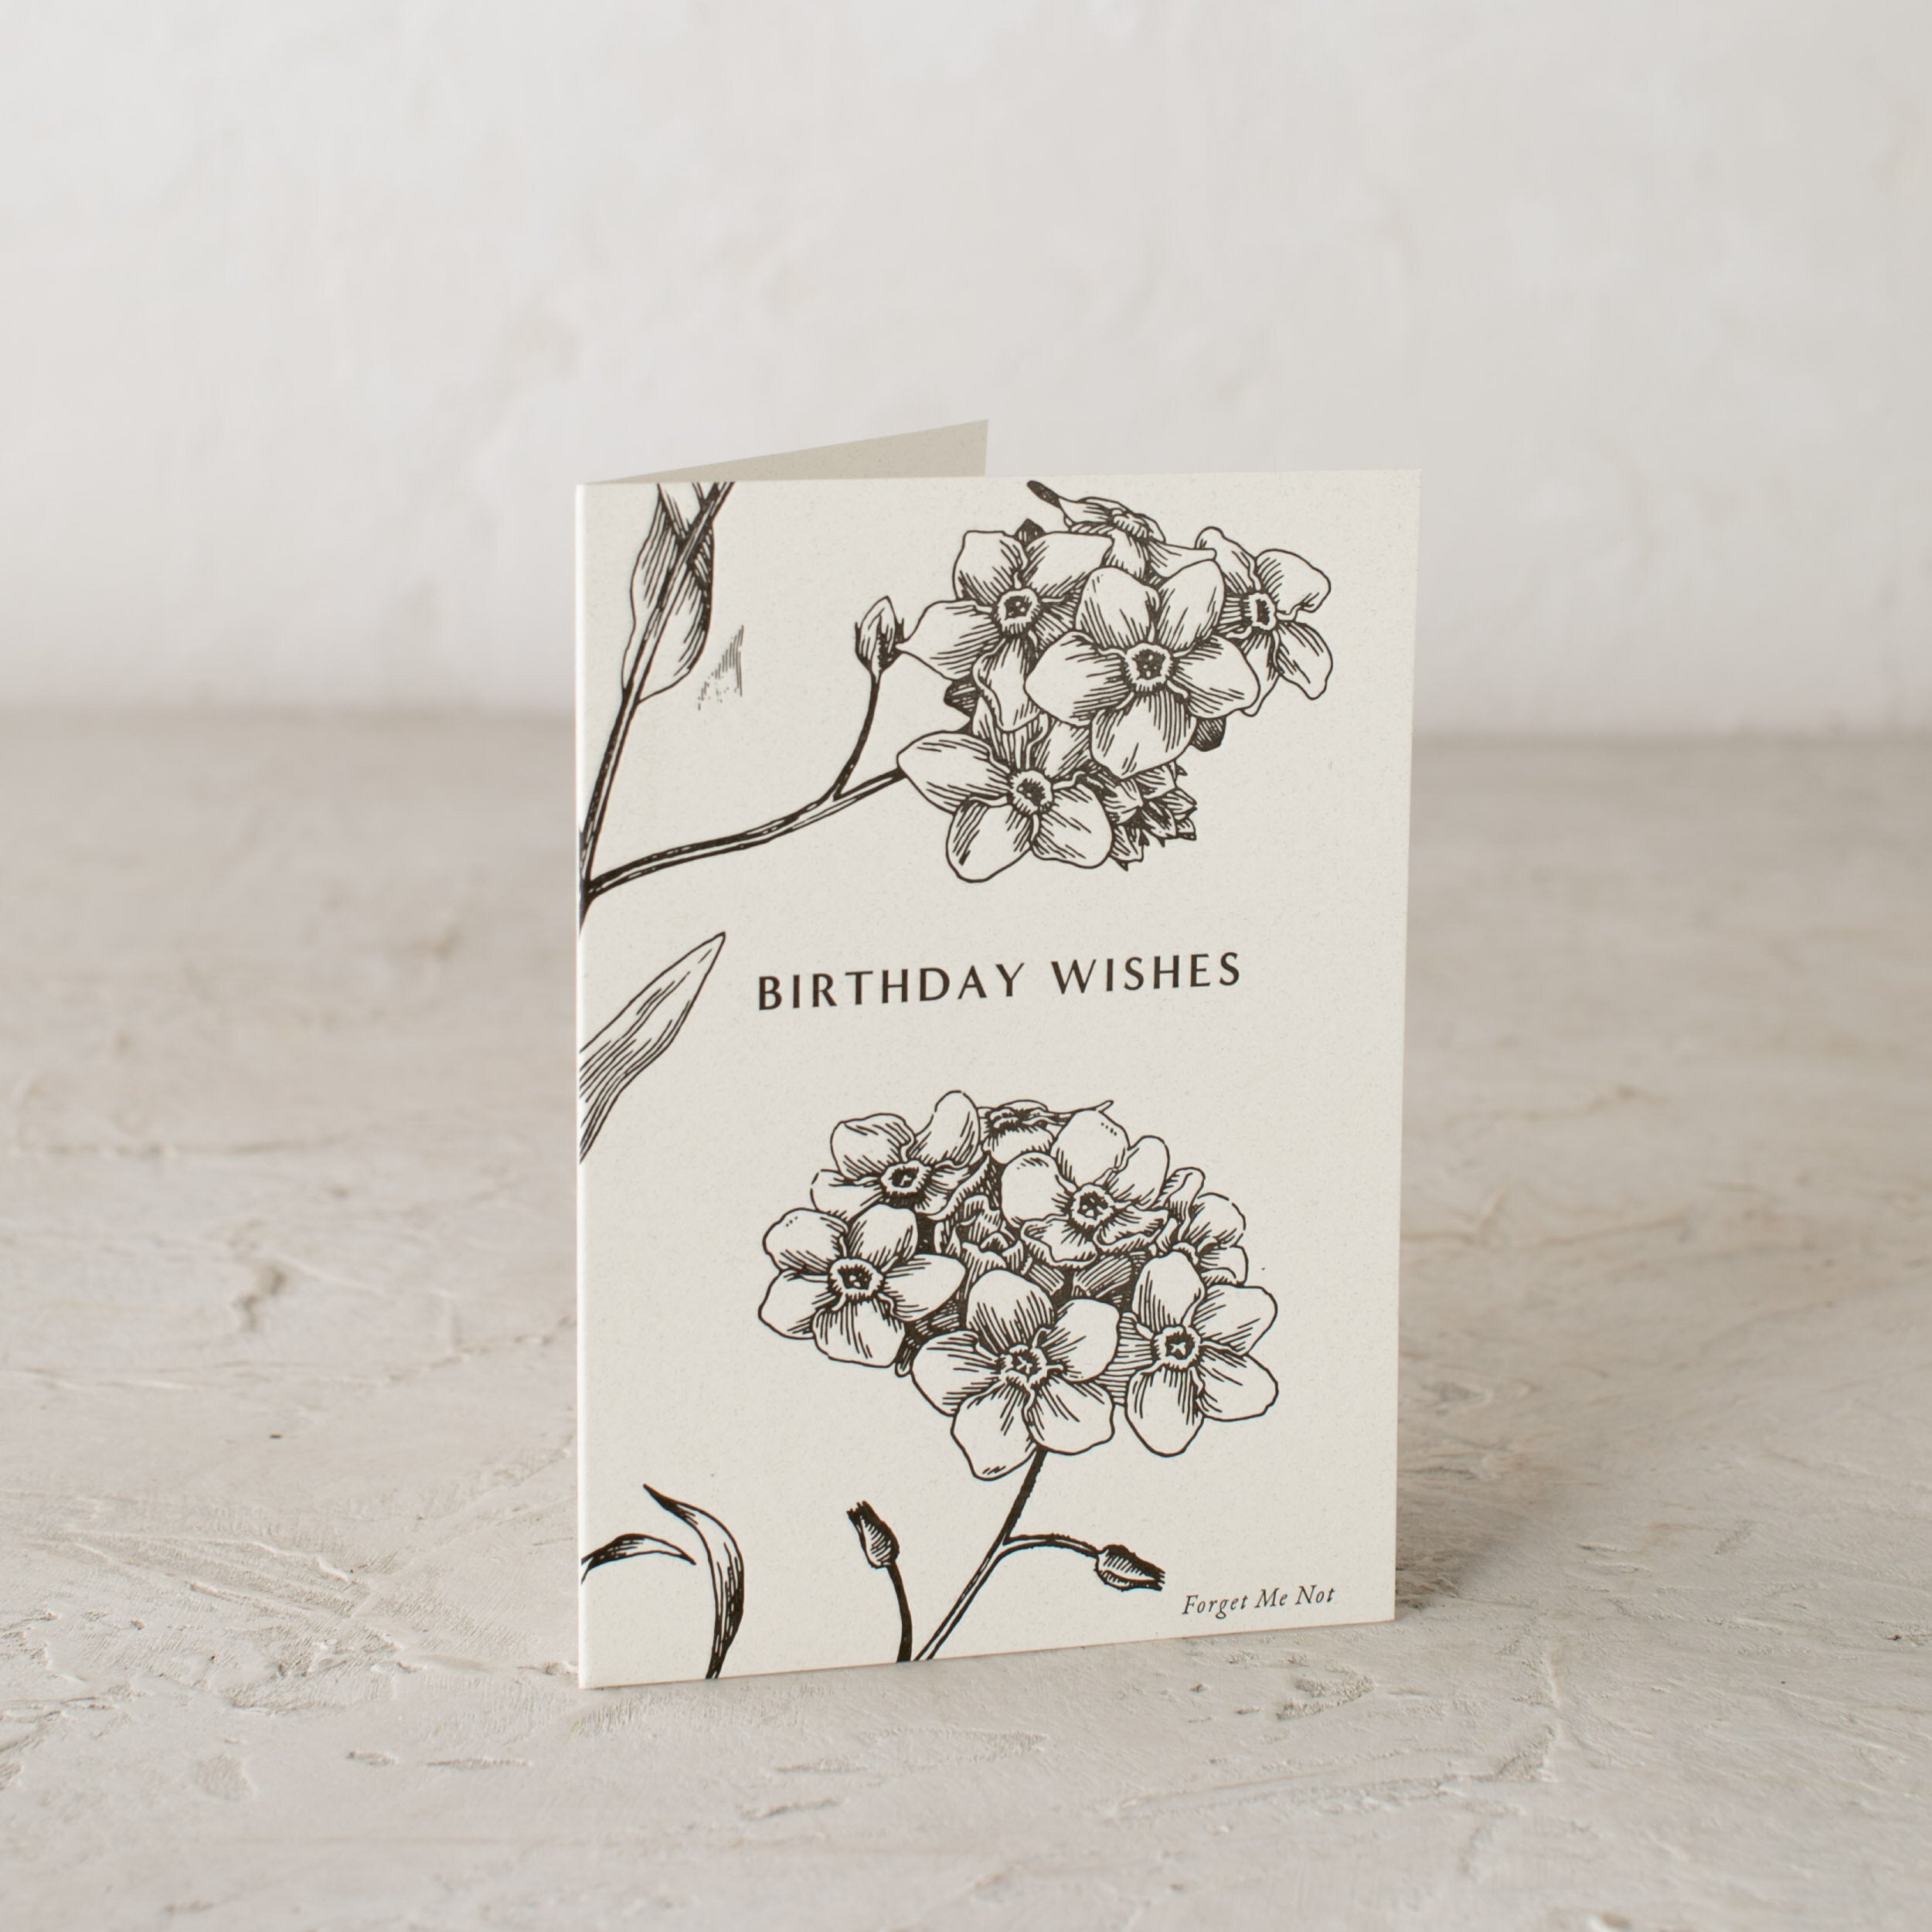 Botanical illustrated embossed cards, "Birthday Wishes" illustrated forget me nots. Designed and sold by Shop Verdant, Kansas City gift store.